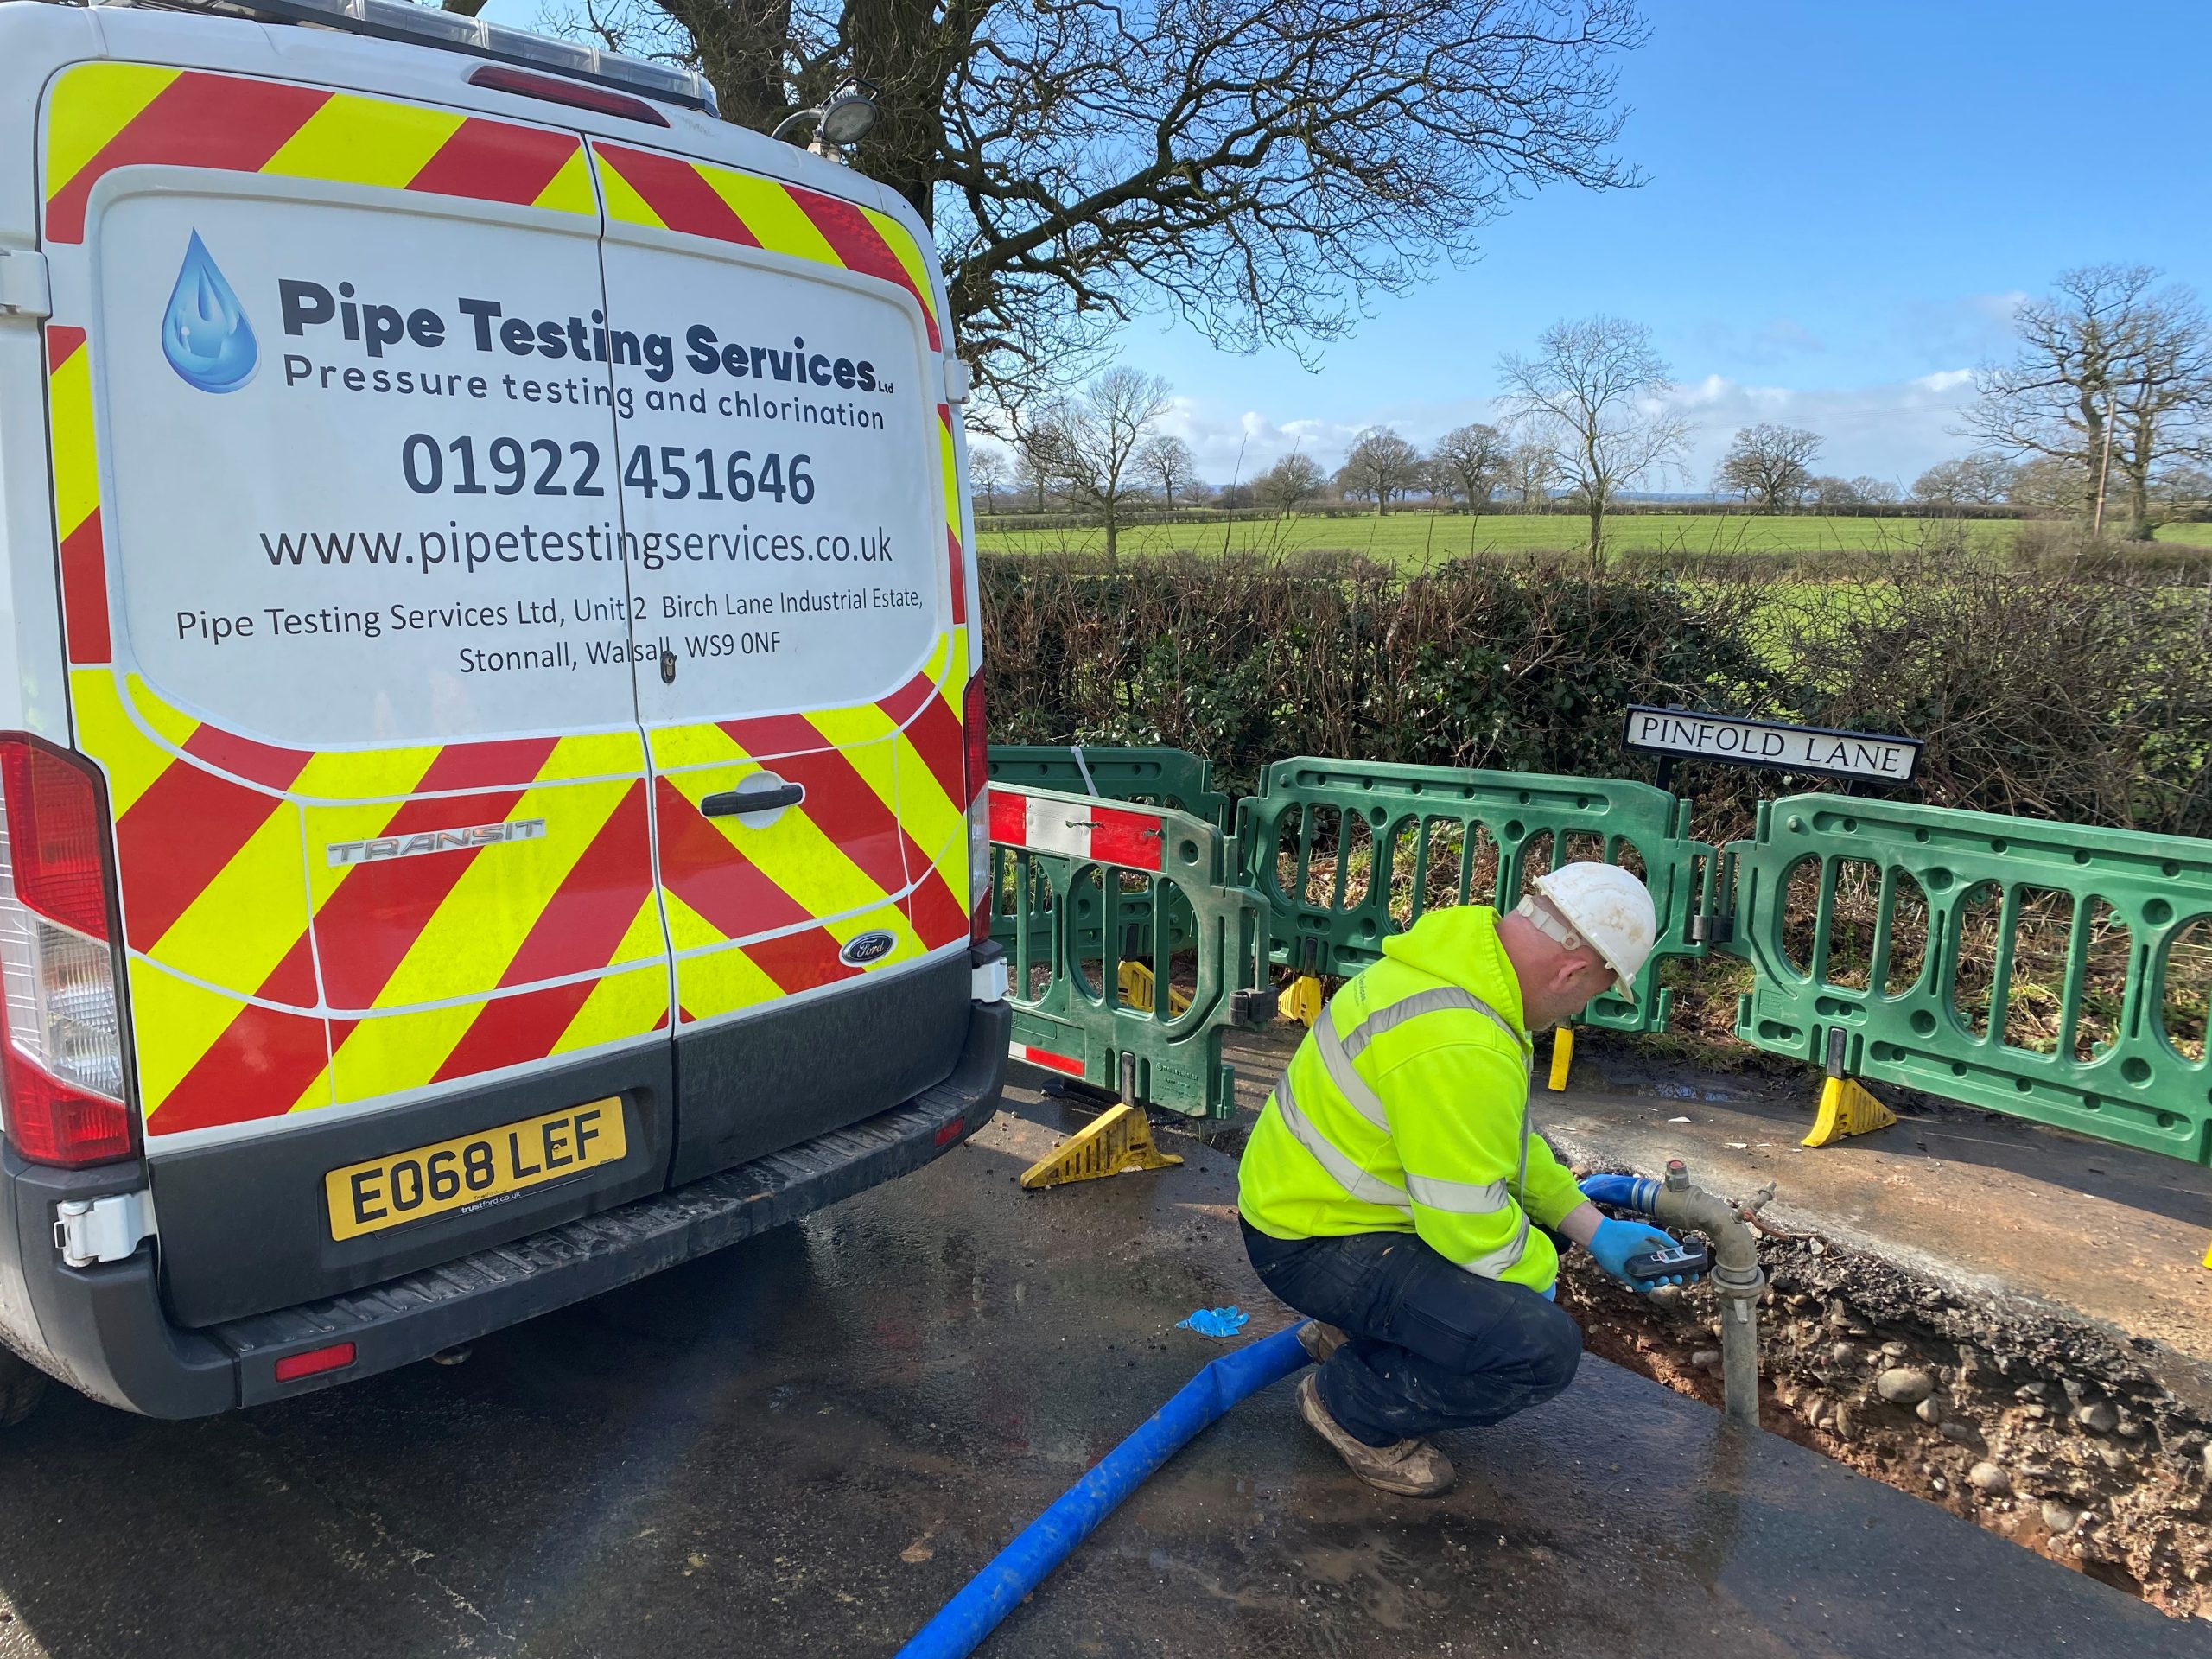 chlorinating pipework & water mains chlorination - image of PTS working on pipework.